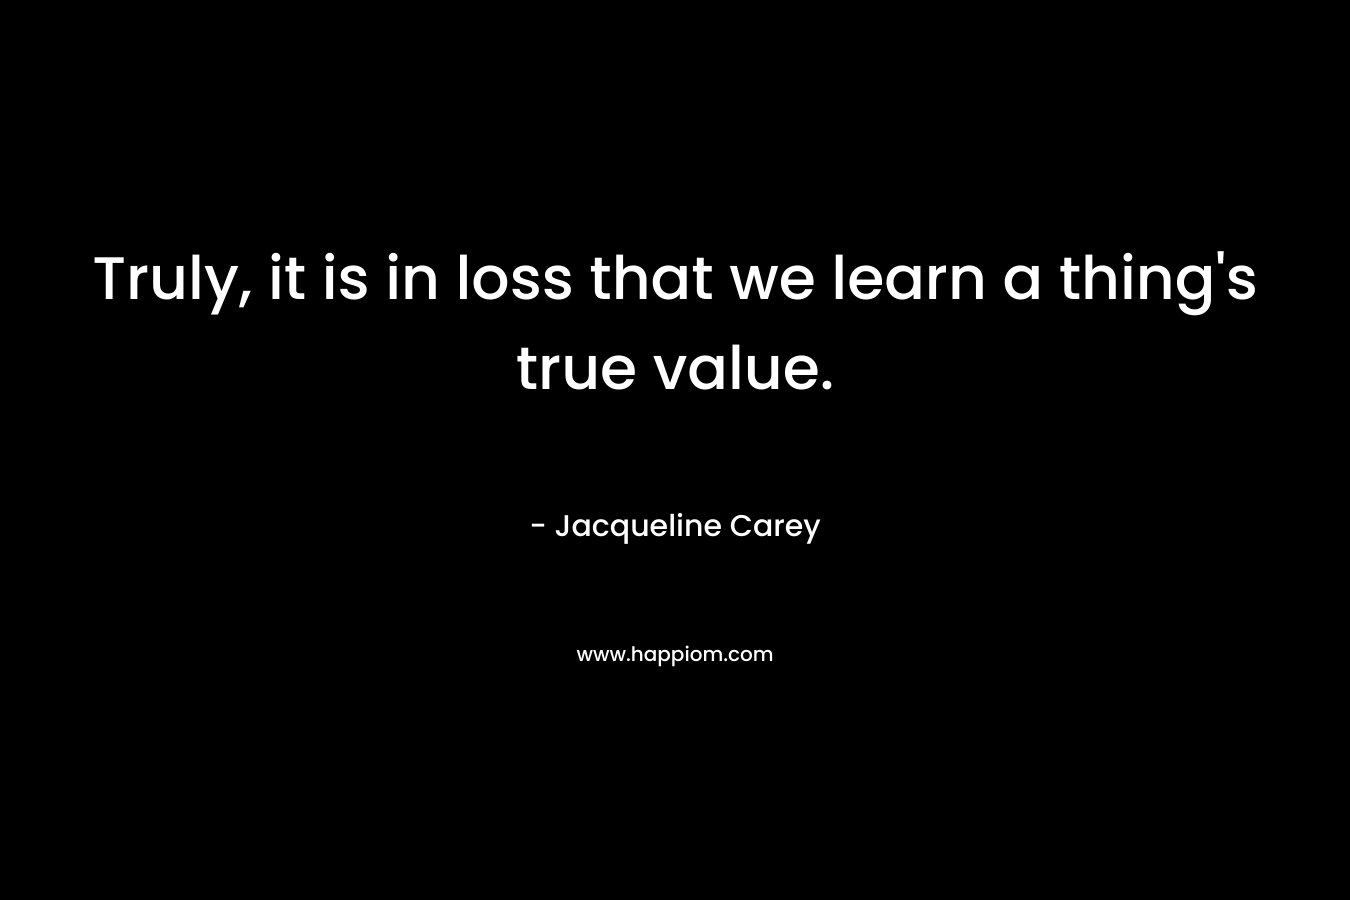 Truly, it is in loss that we learn a thing's true value.